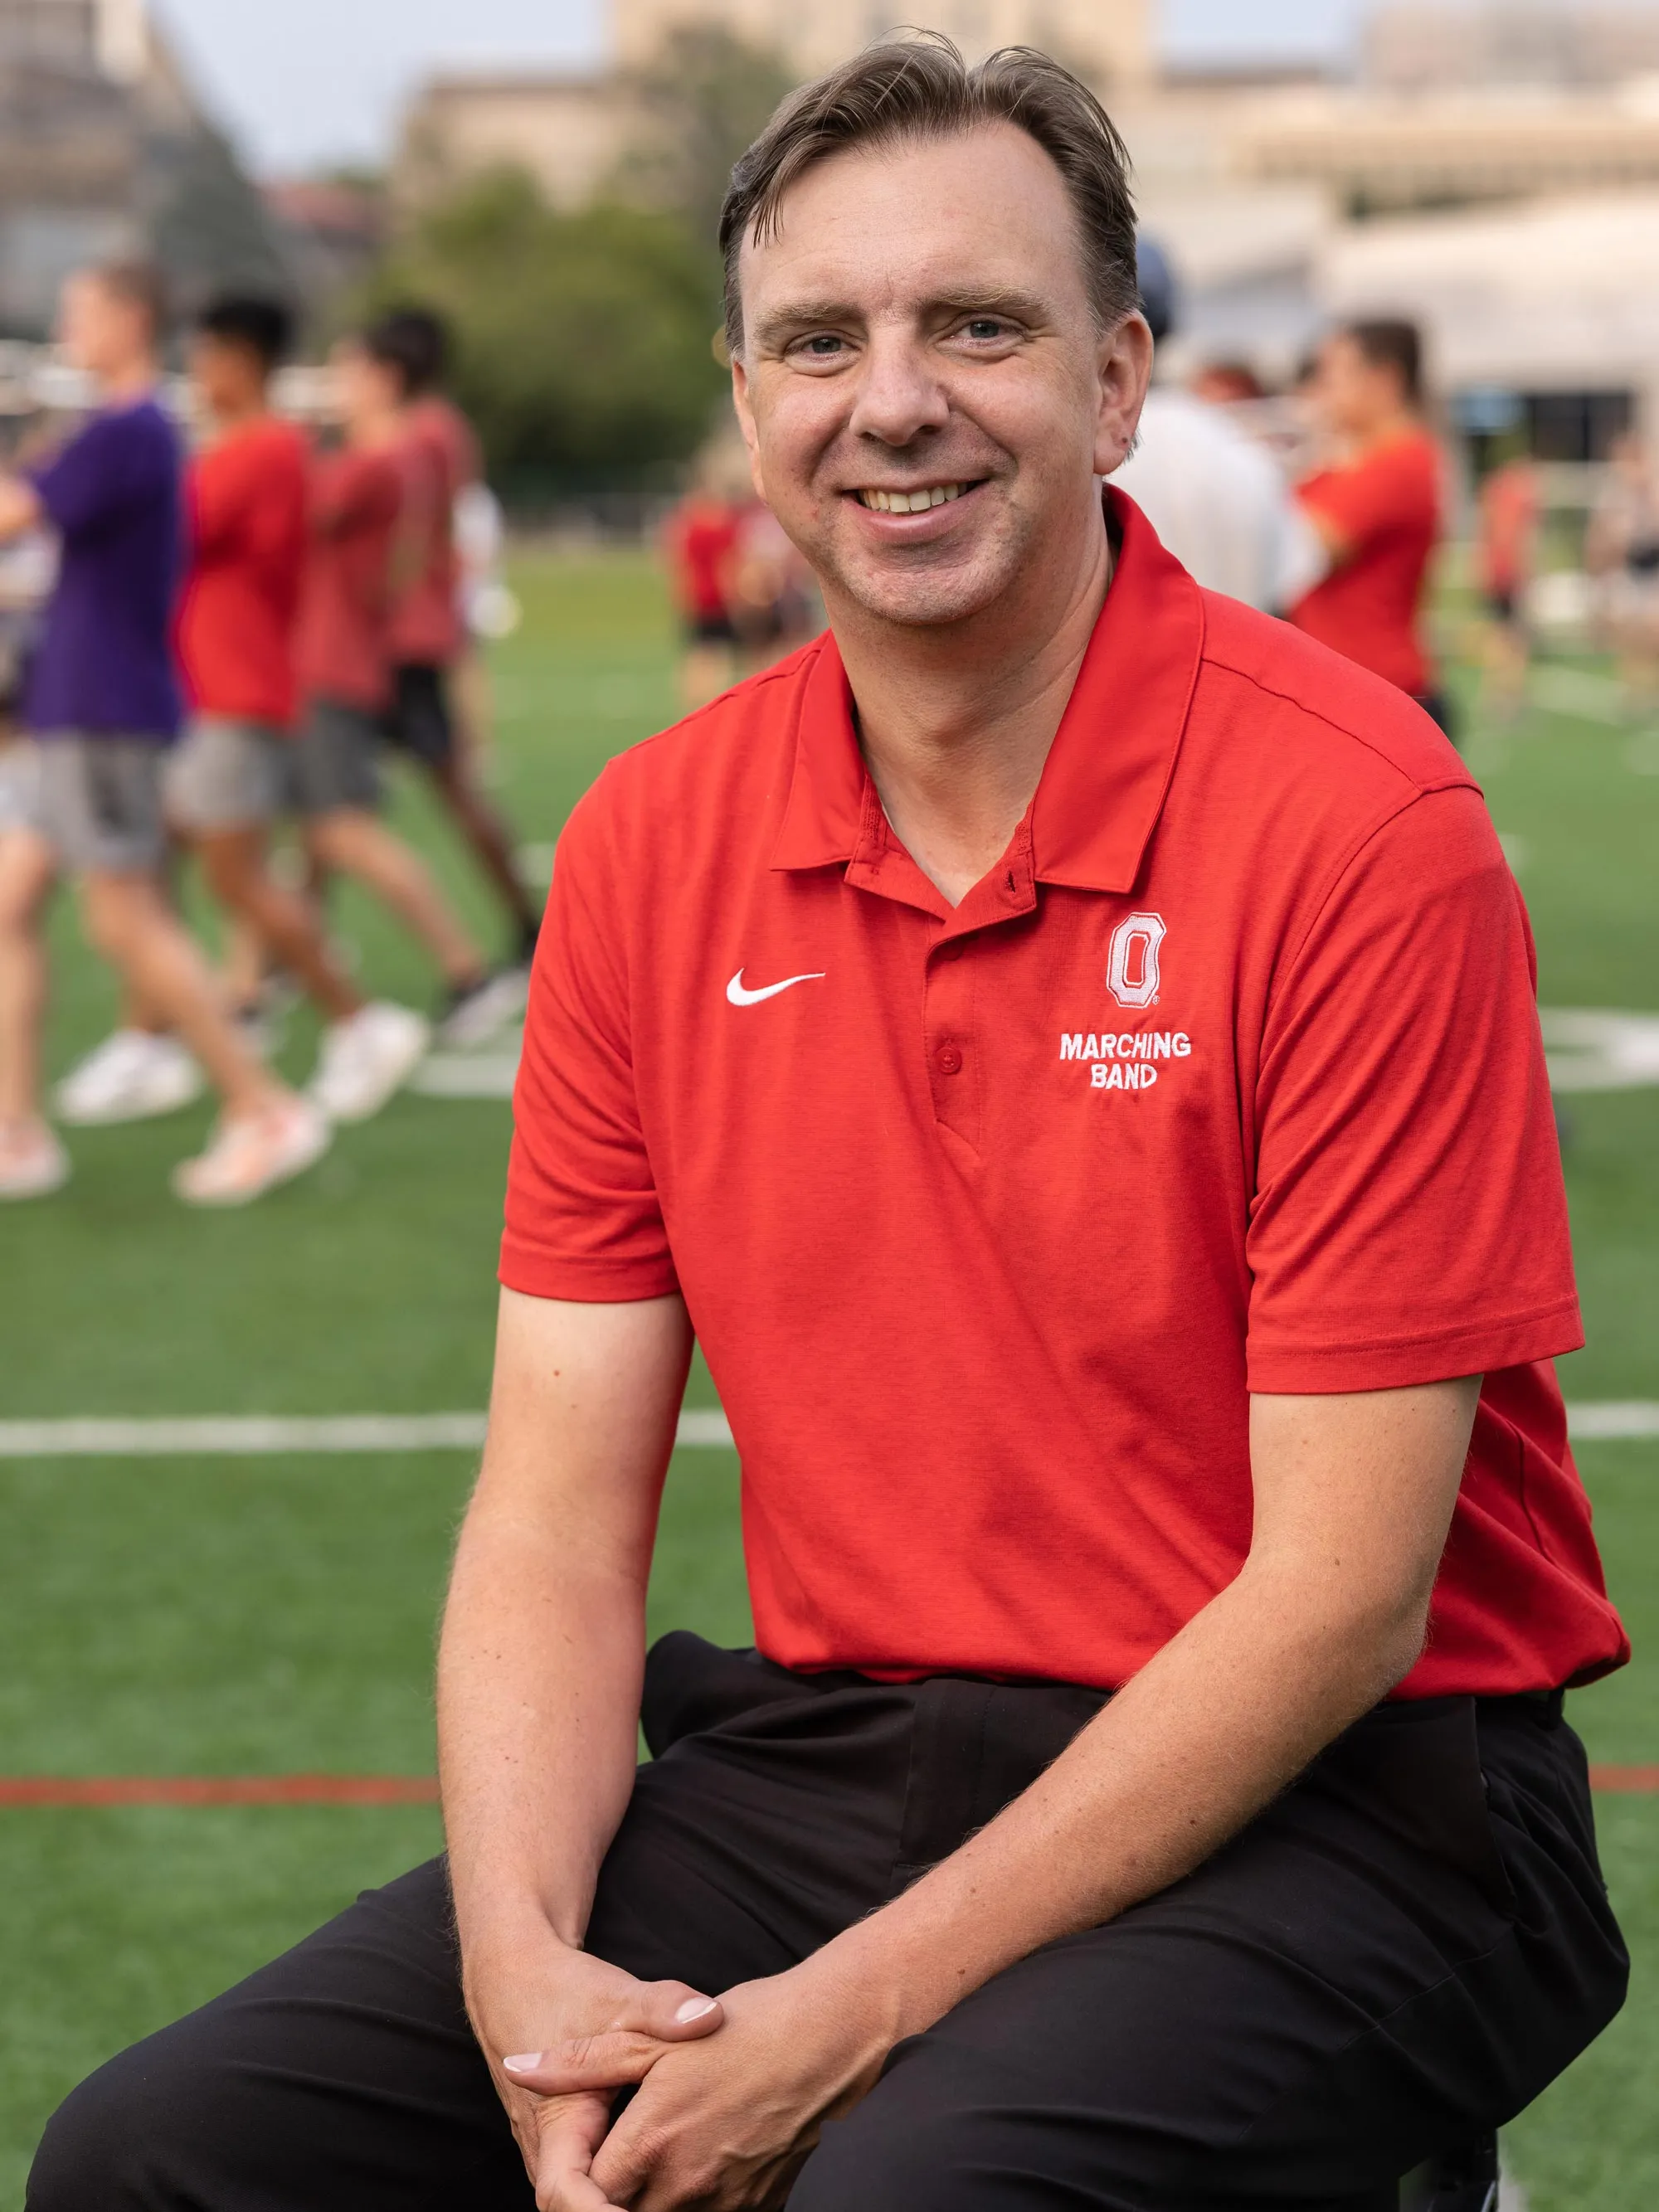 As members of the band practices behind him in their street clothes, marching band director Chris Hoch sits on a stool on the practice field. His hair’s a bit messy, his clothes are casual, and his expression is happy. 